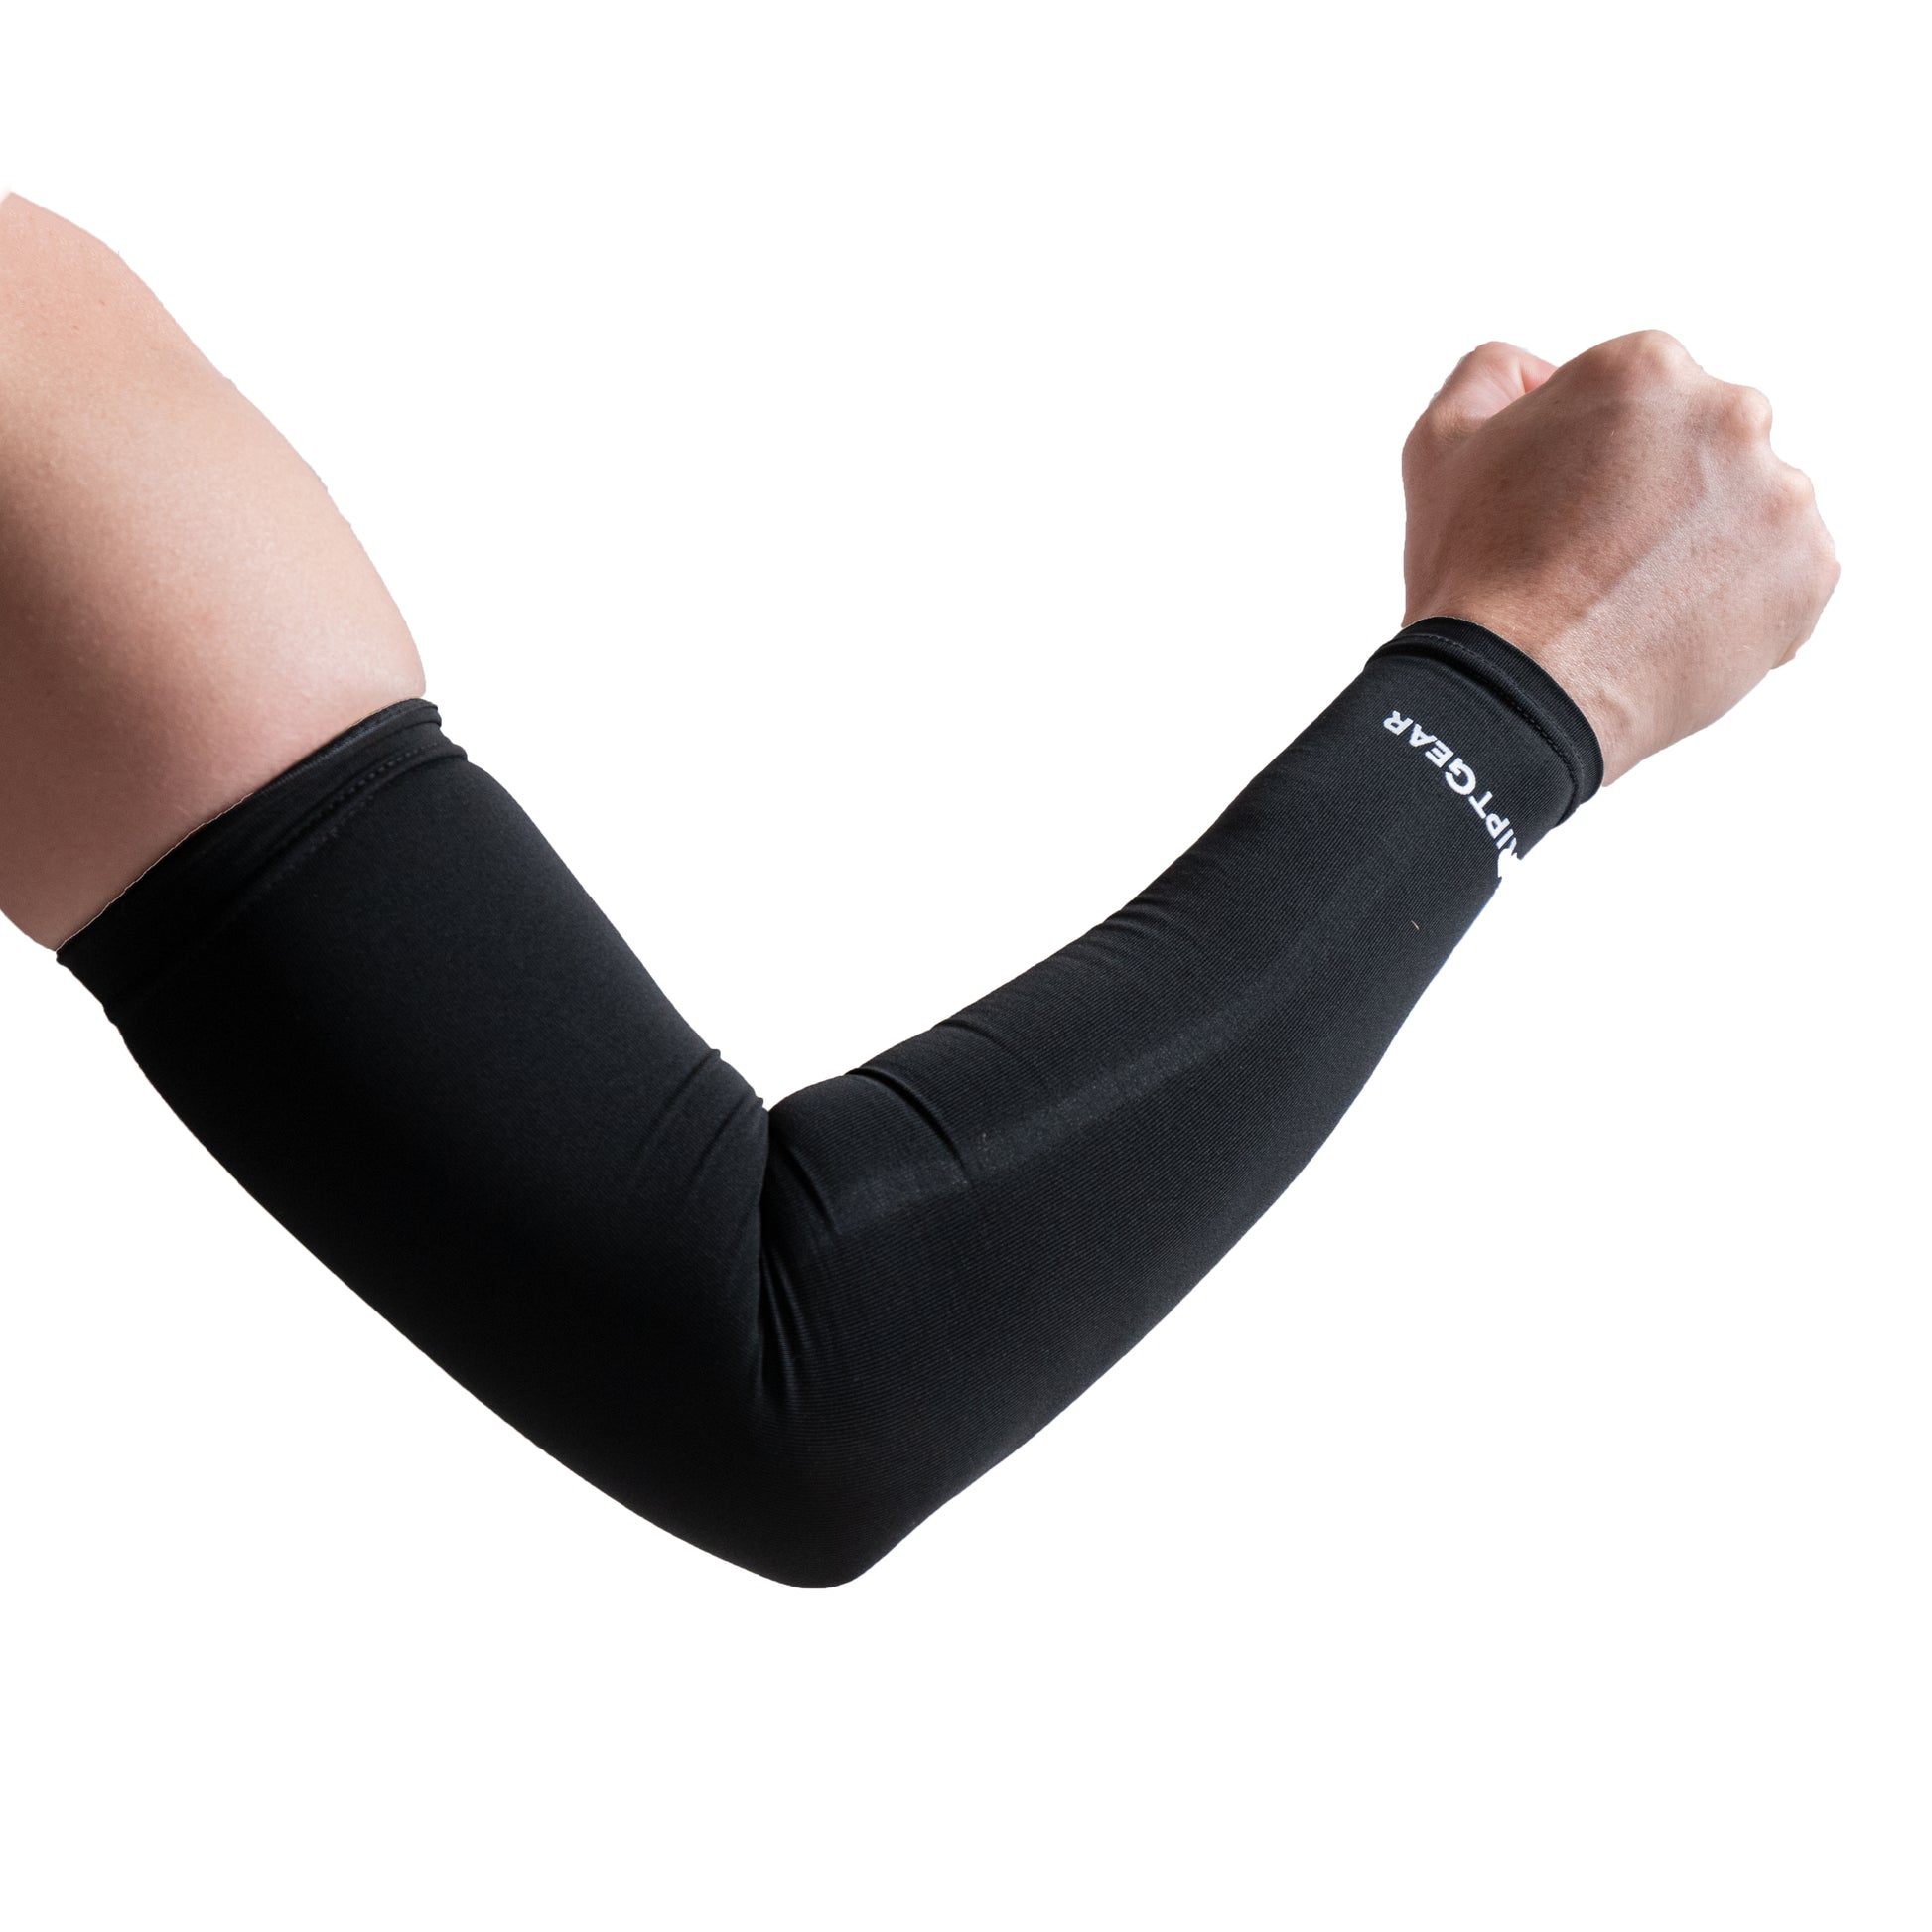 Let's slim Arm Sleeves (Wrist), Other Apparel